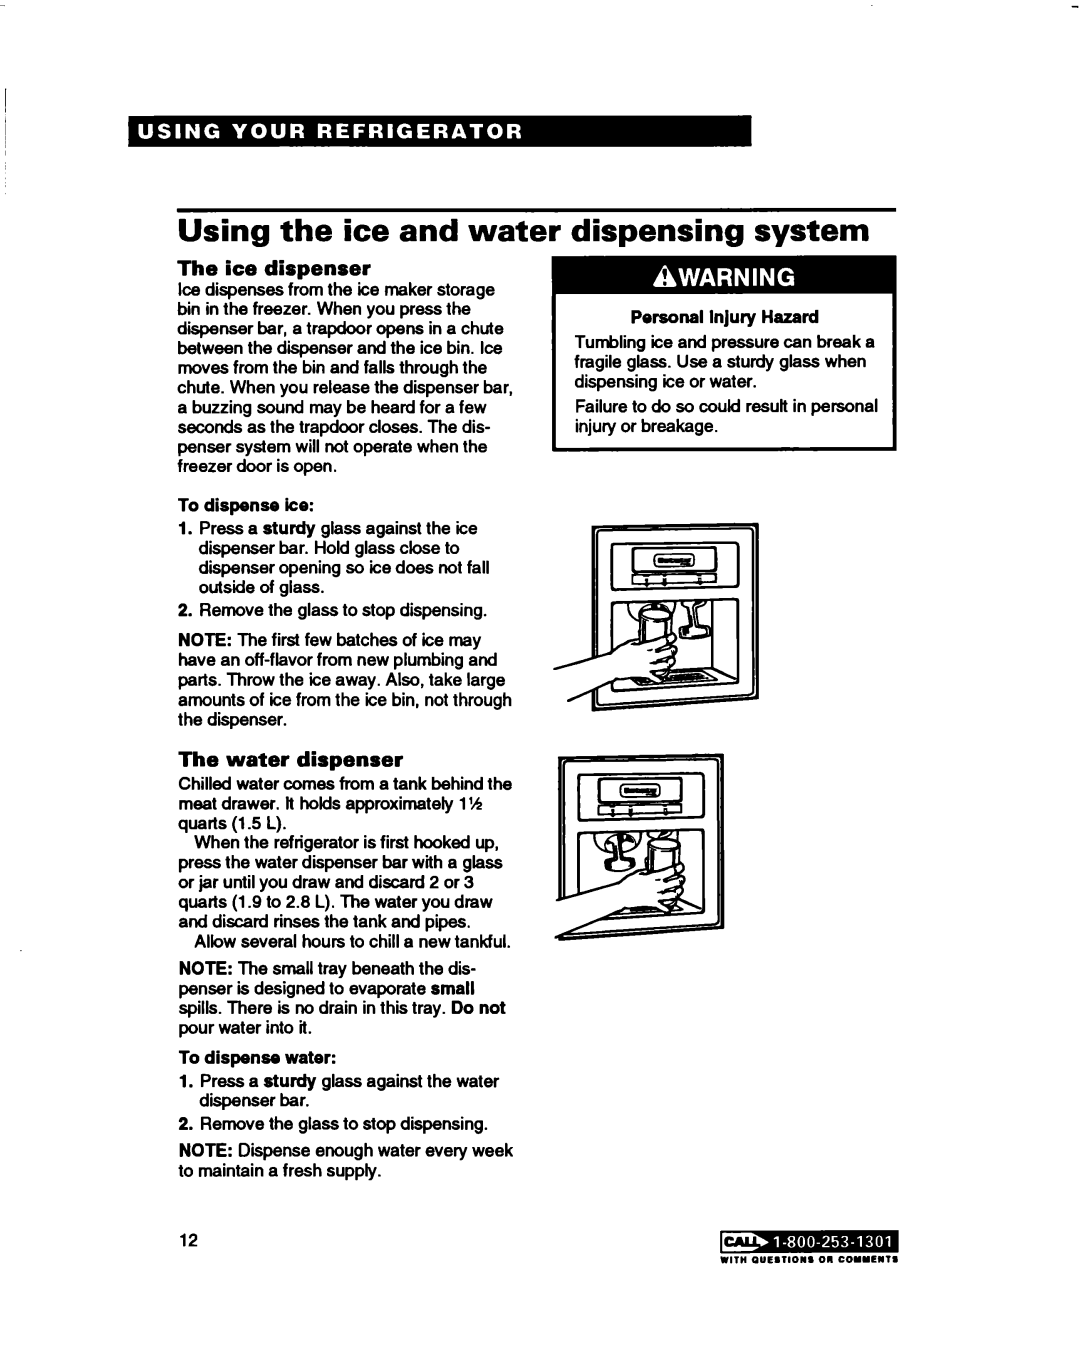 Estate 2173445 warranty Using the ice and water, dispensing system, The ice dispenser, The water dispenser, To dispense ice 